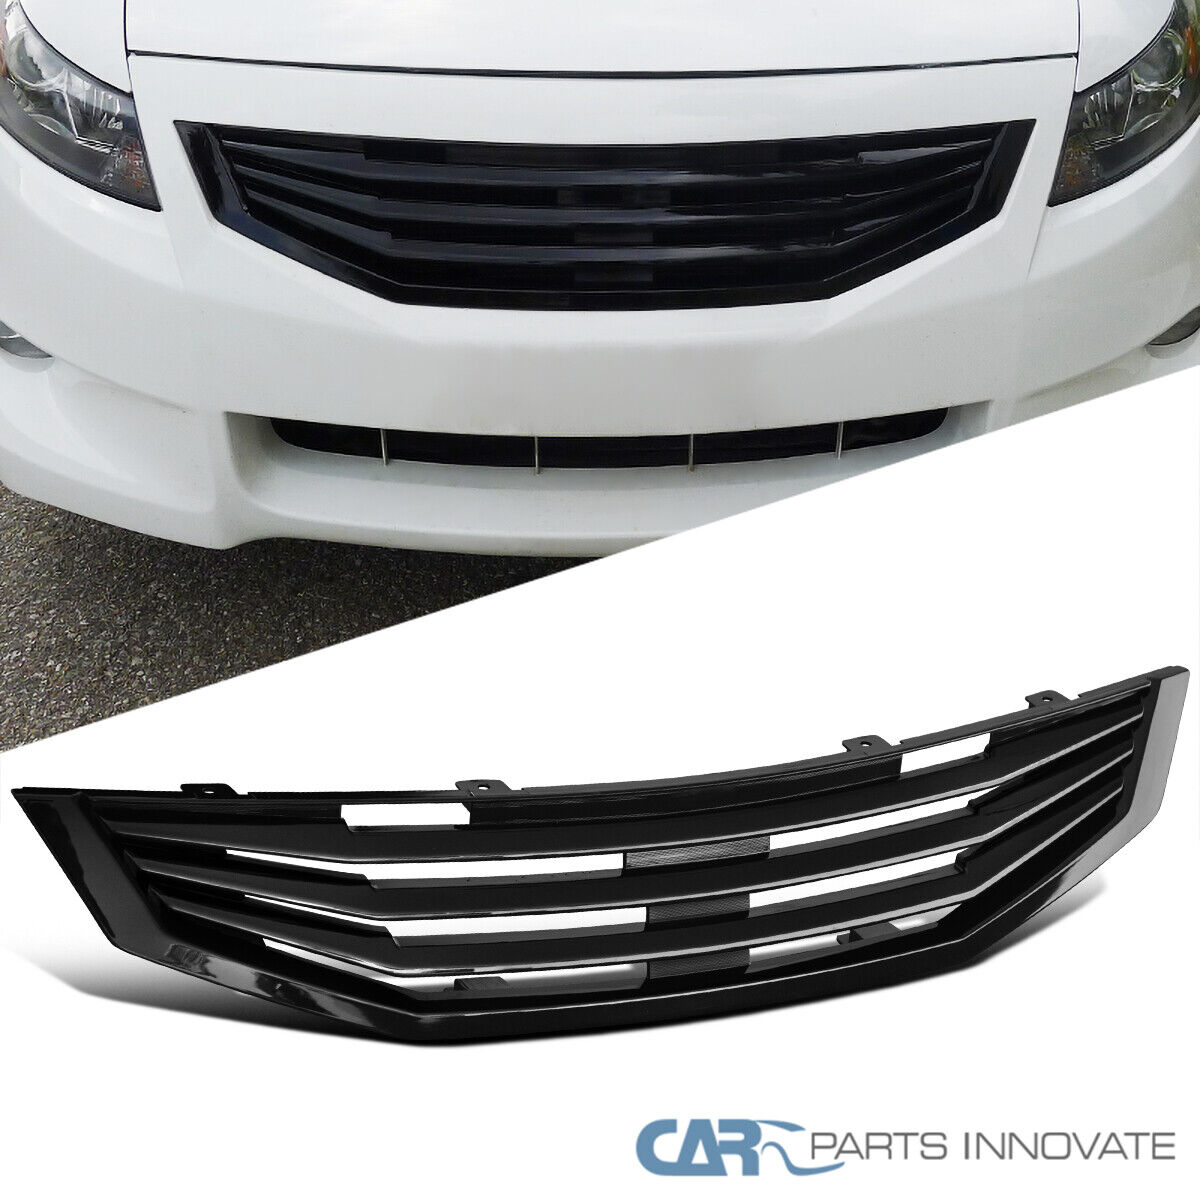 Fits Honda 08-10 Accord 2Dr Coupe Black Front Bumper Hood Grill Grille